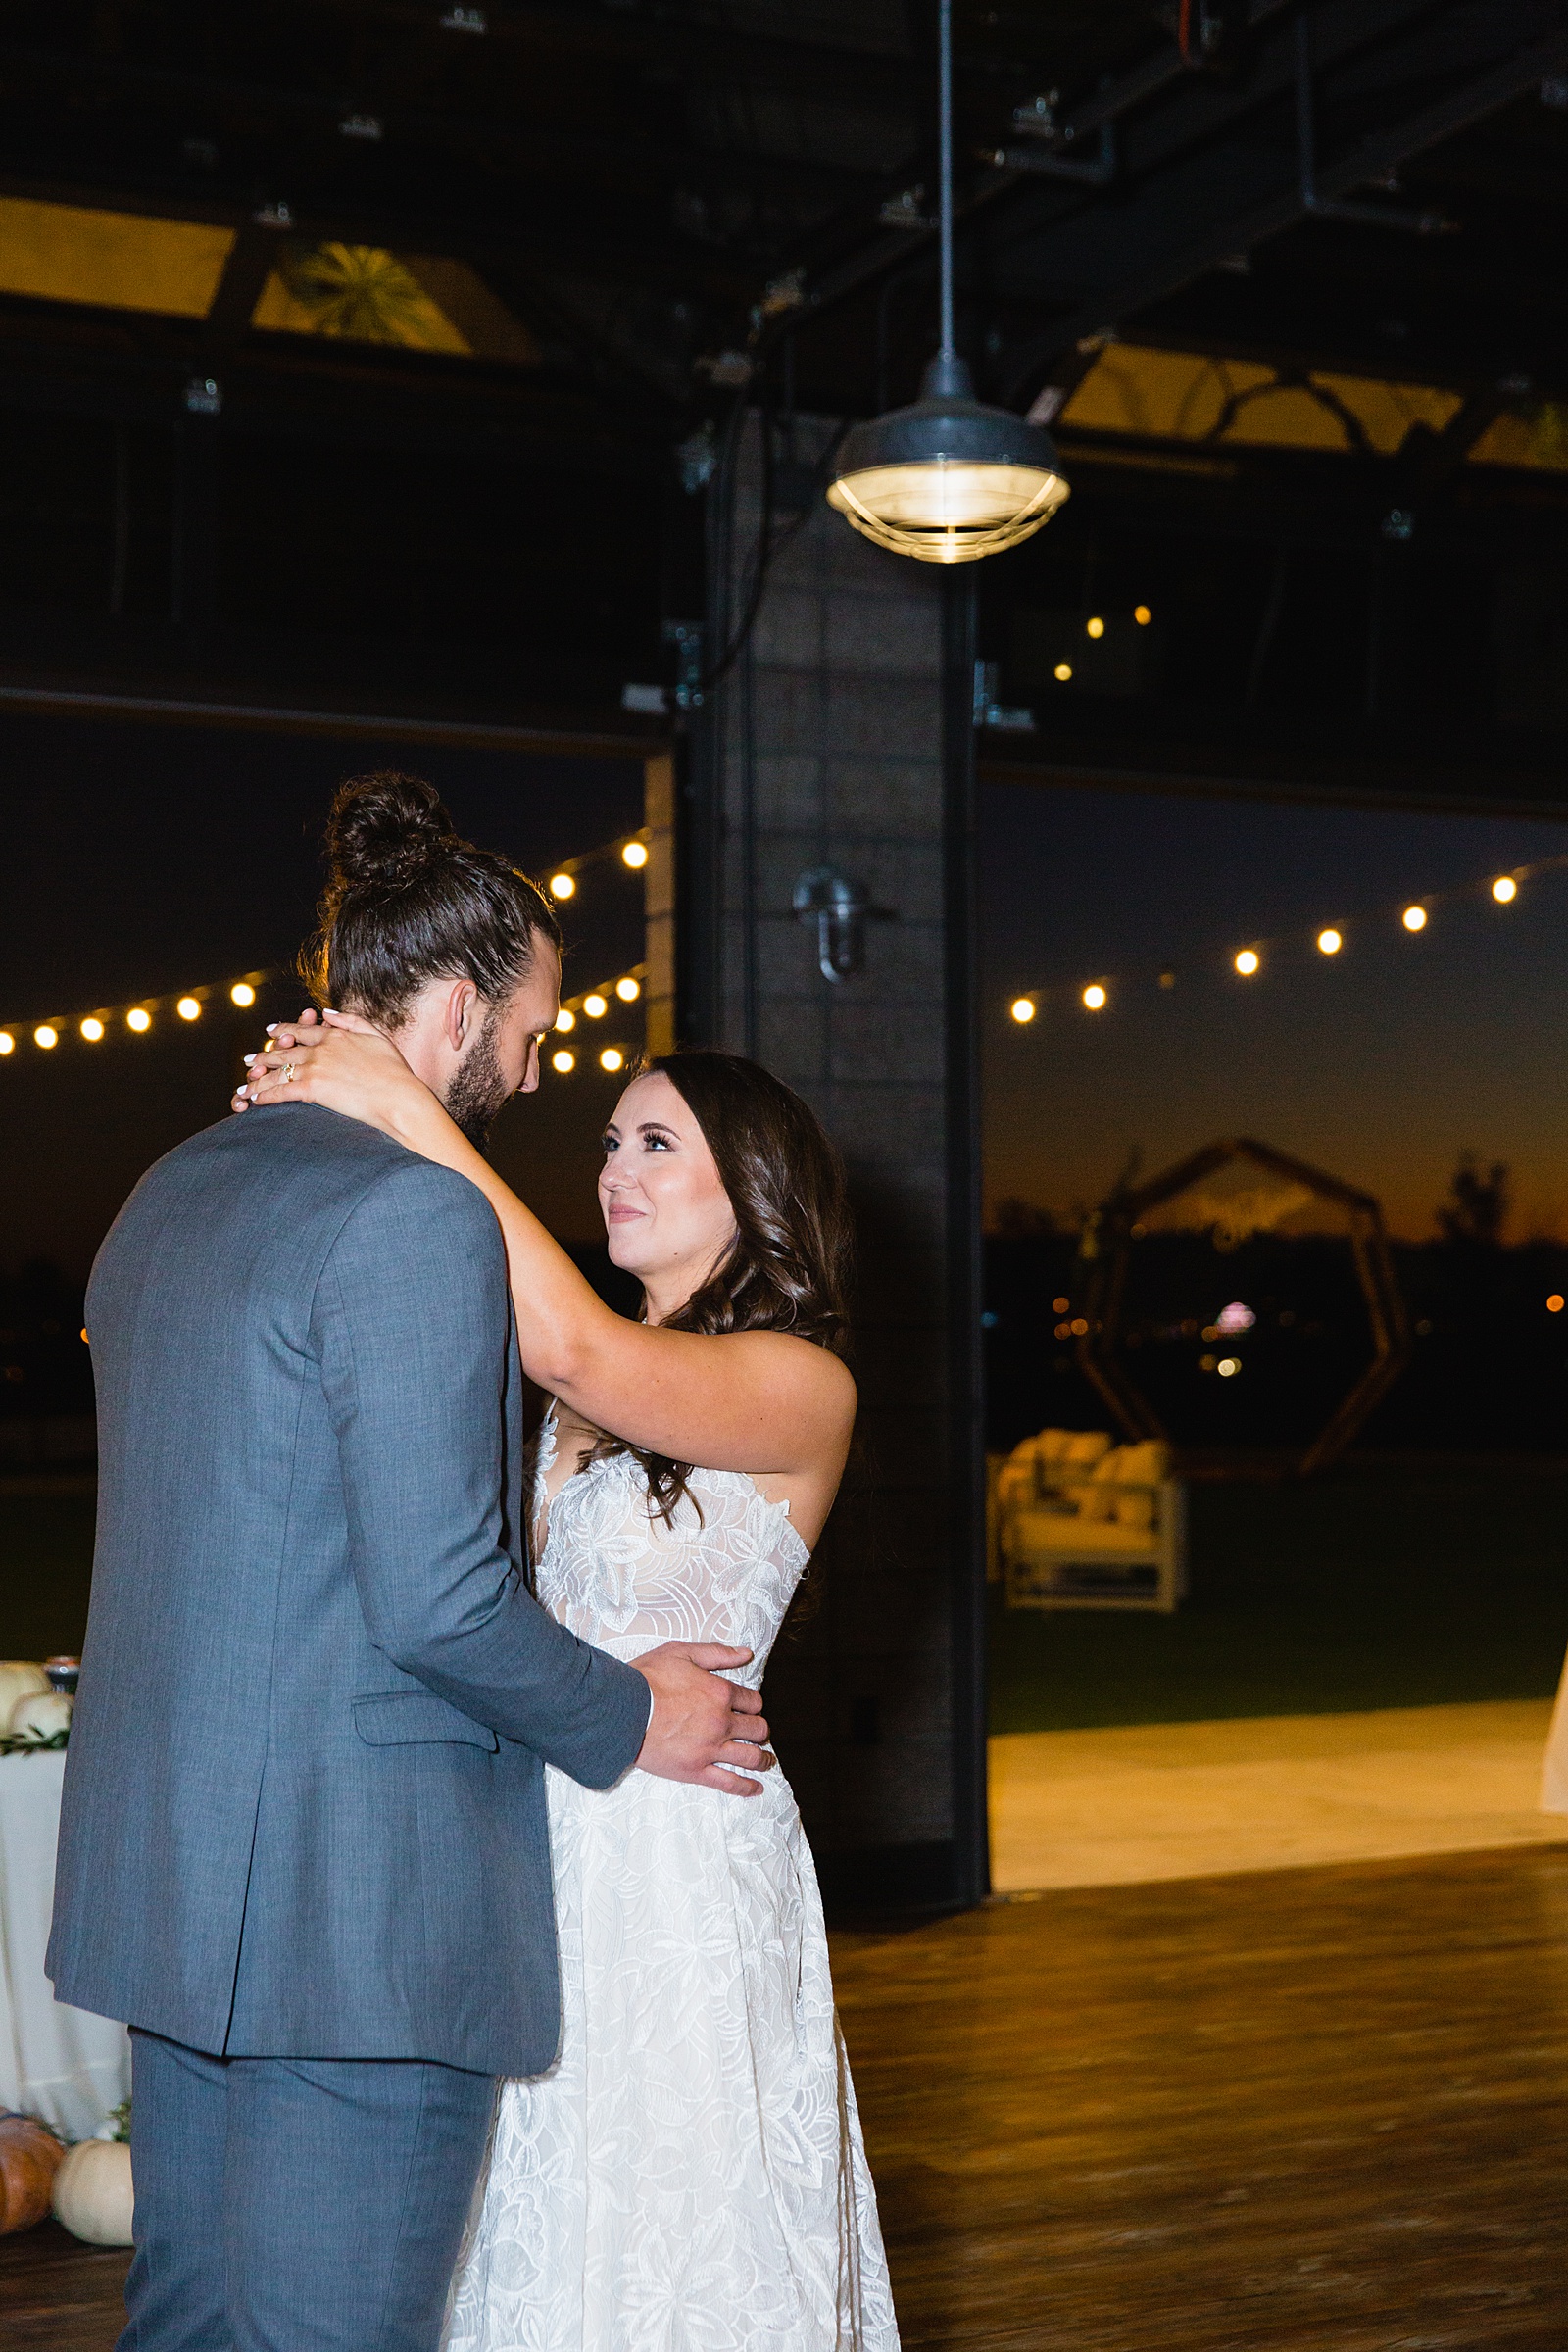 Bride and groom sharing first dance at their Papago Events wedding reception by Arizona wedding photographer PMA Photography.